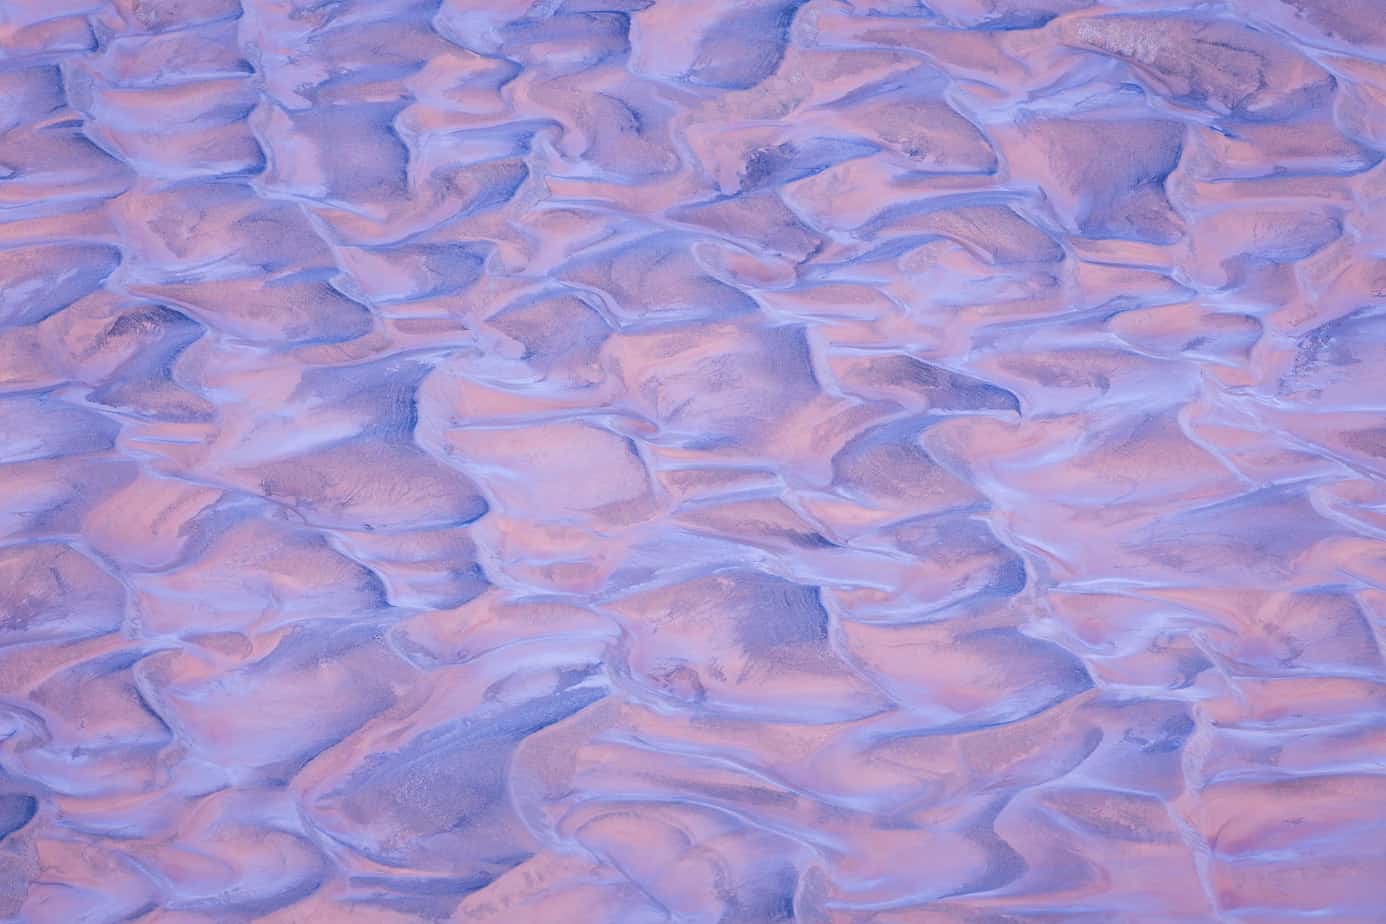 Ripples of soft colored sand take on the pink and blues of twilight on an early morning in Death Valley National Park.